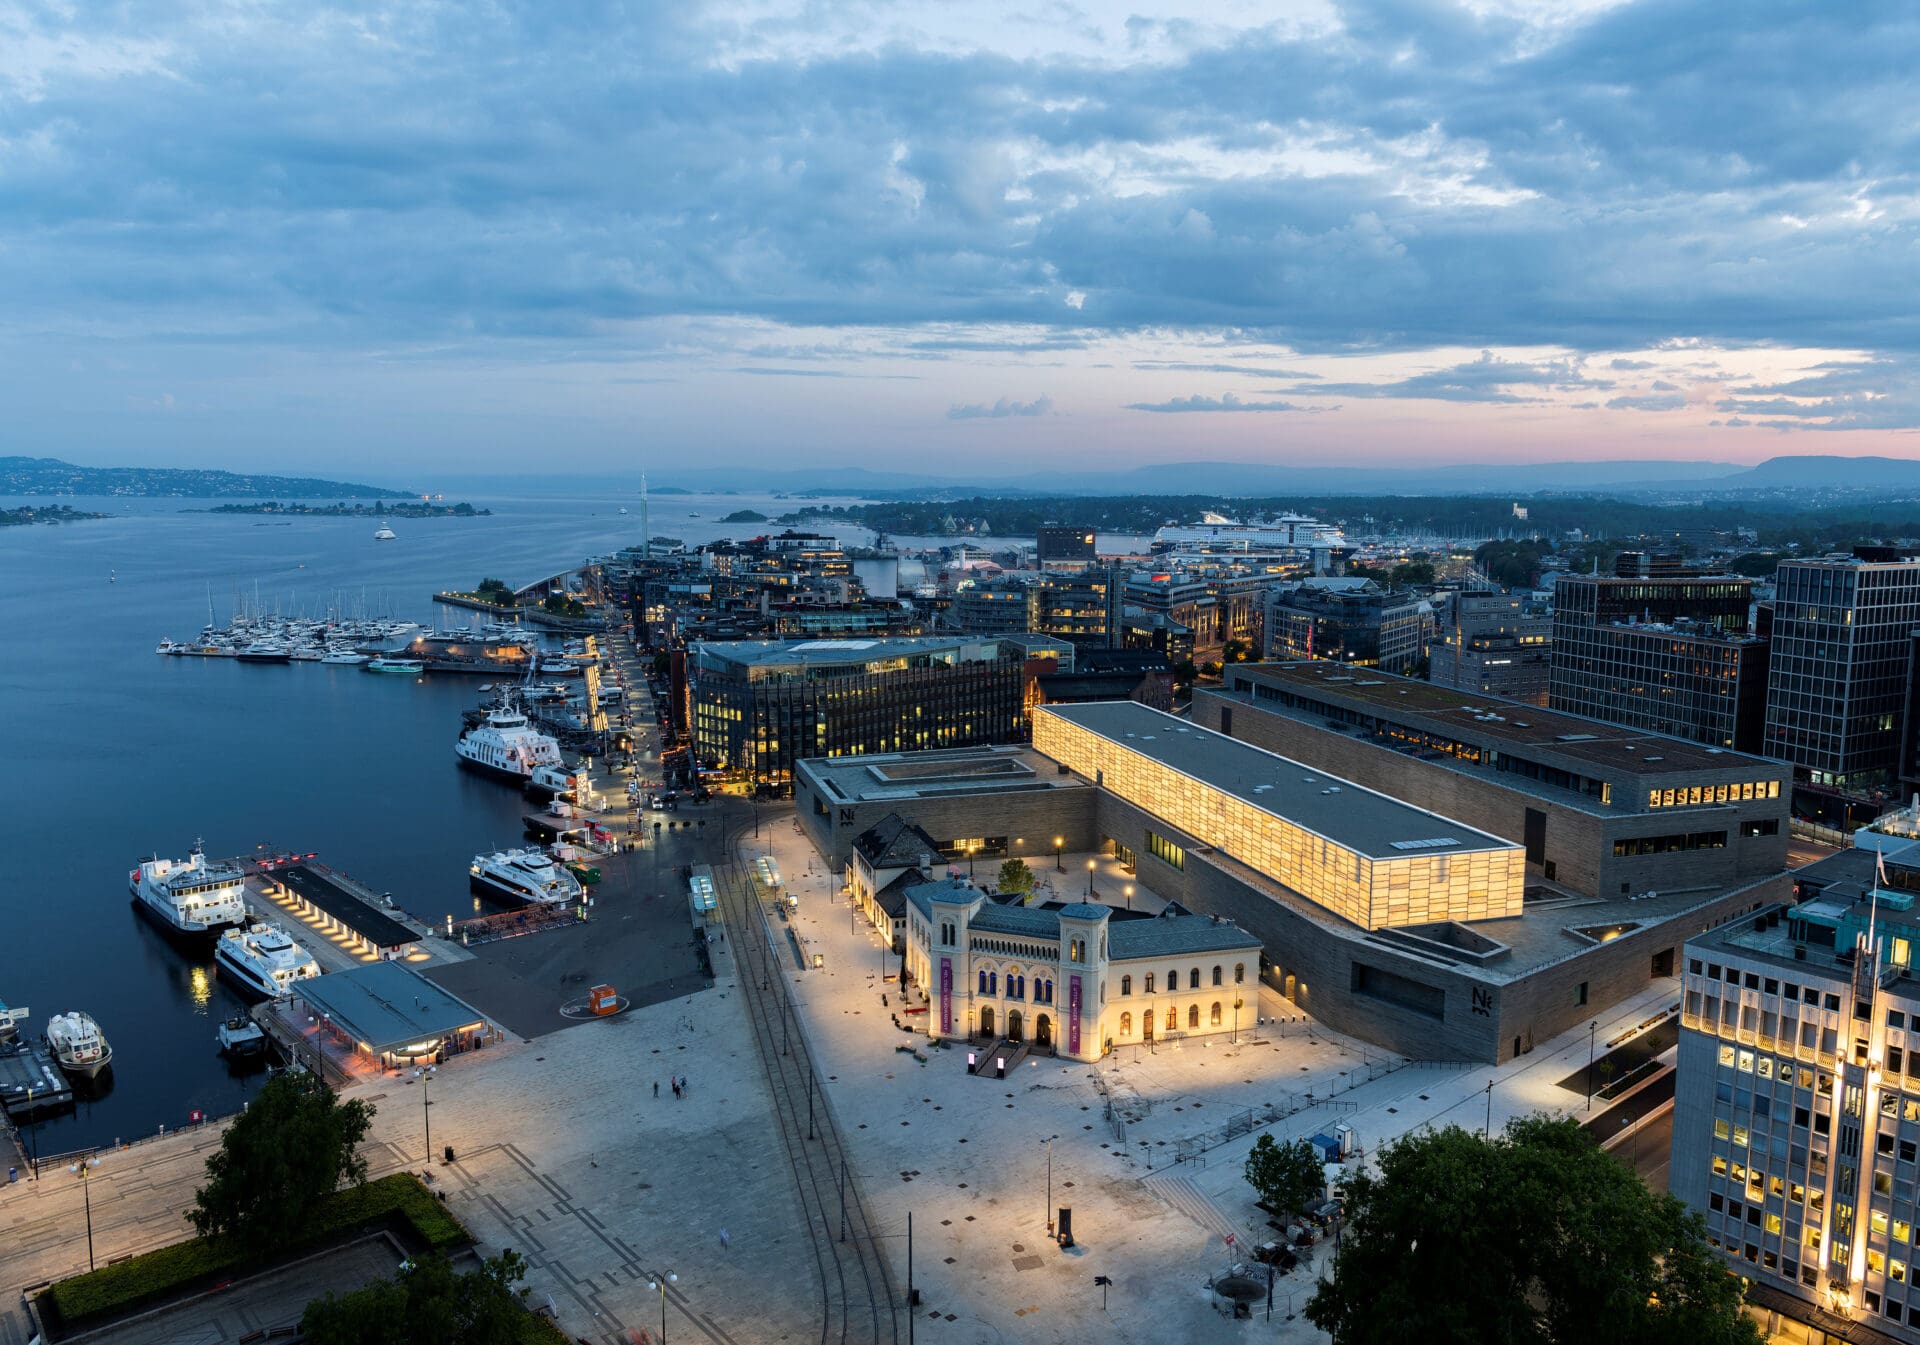 A view of which The National Museum, Oslo, with a backdrop of the ocean